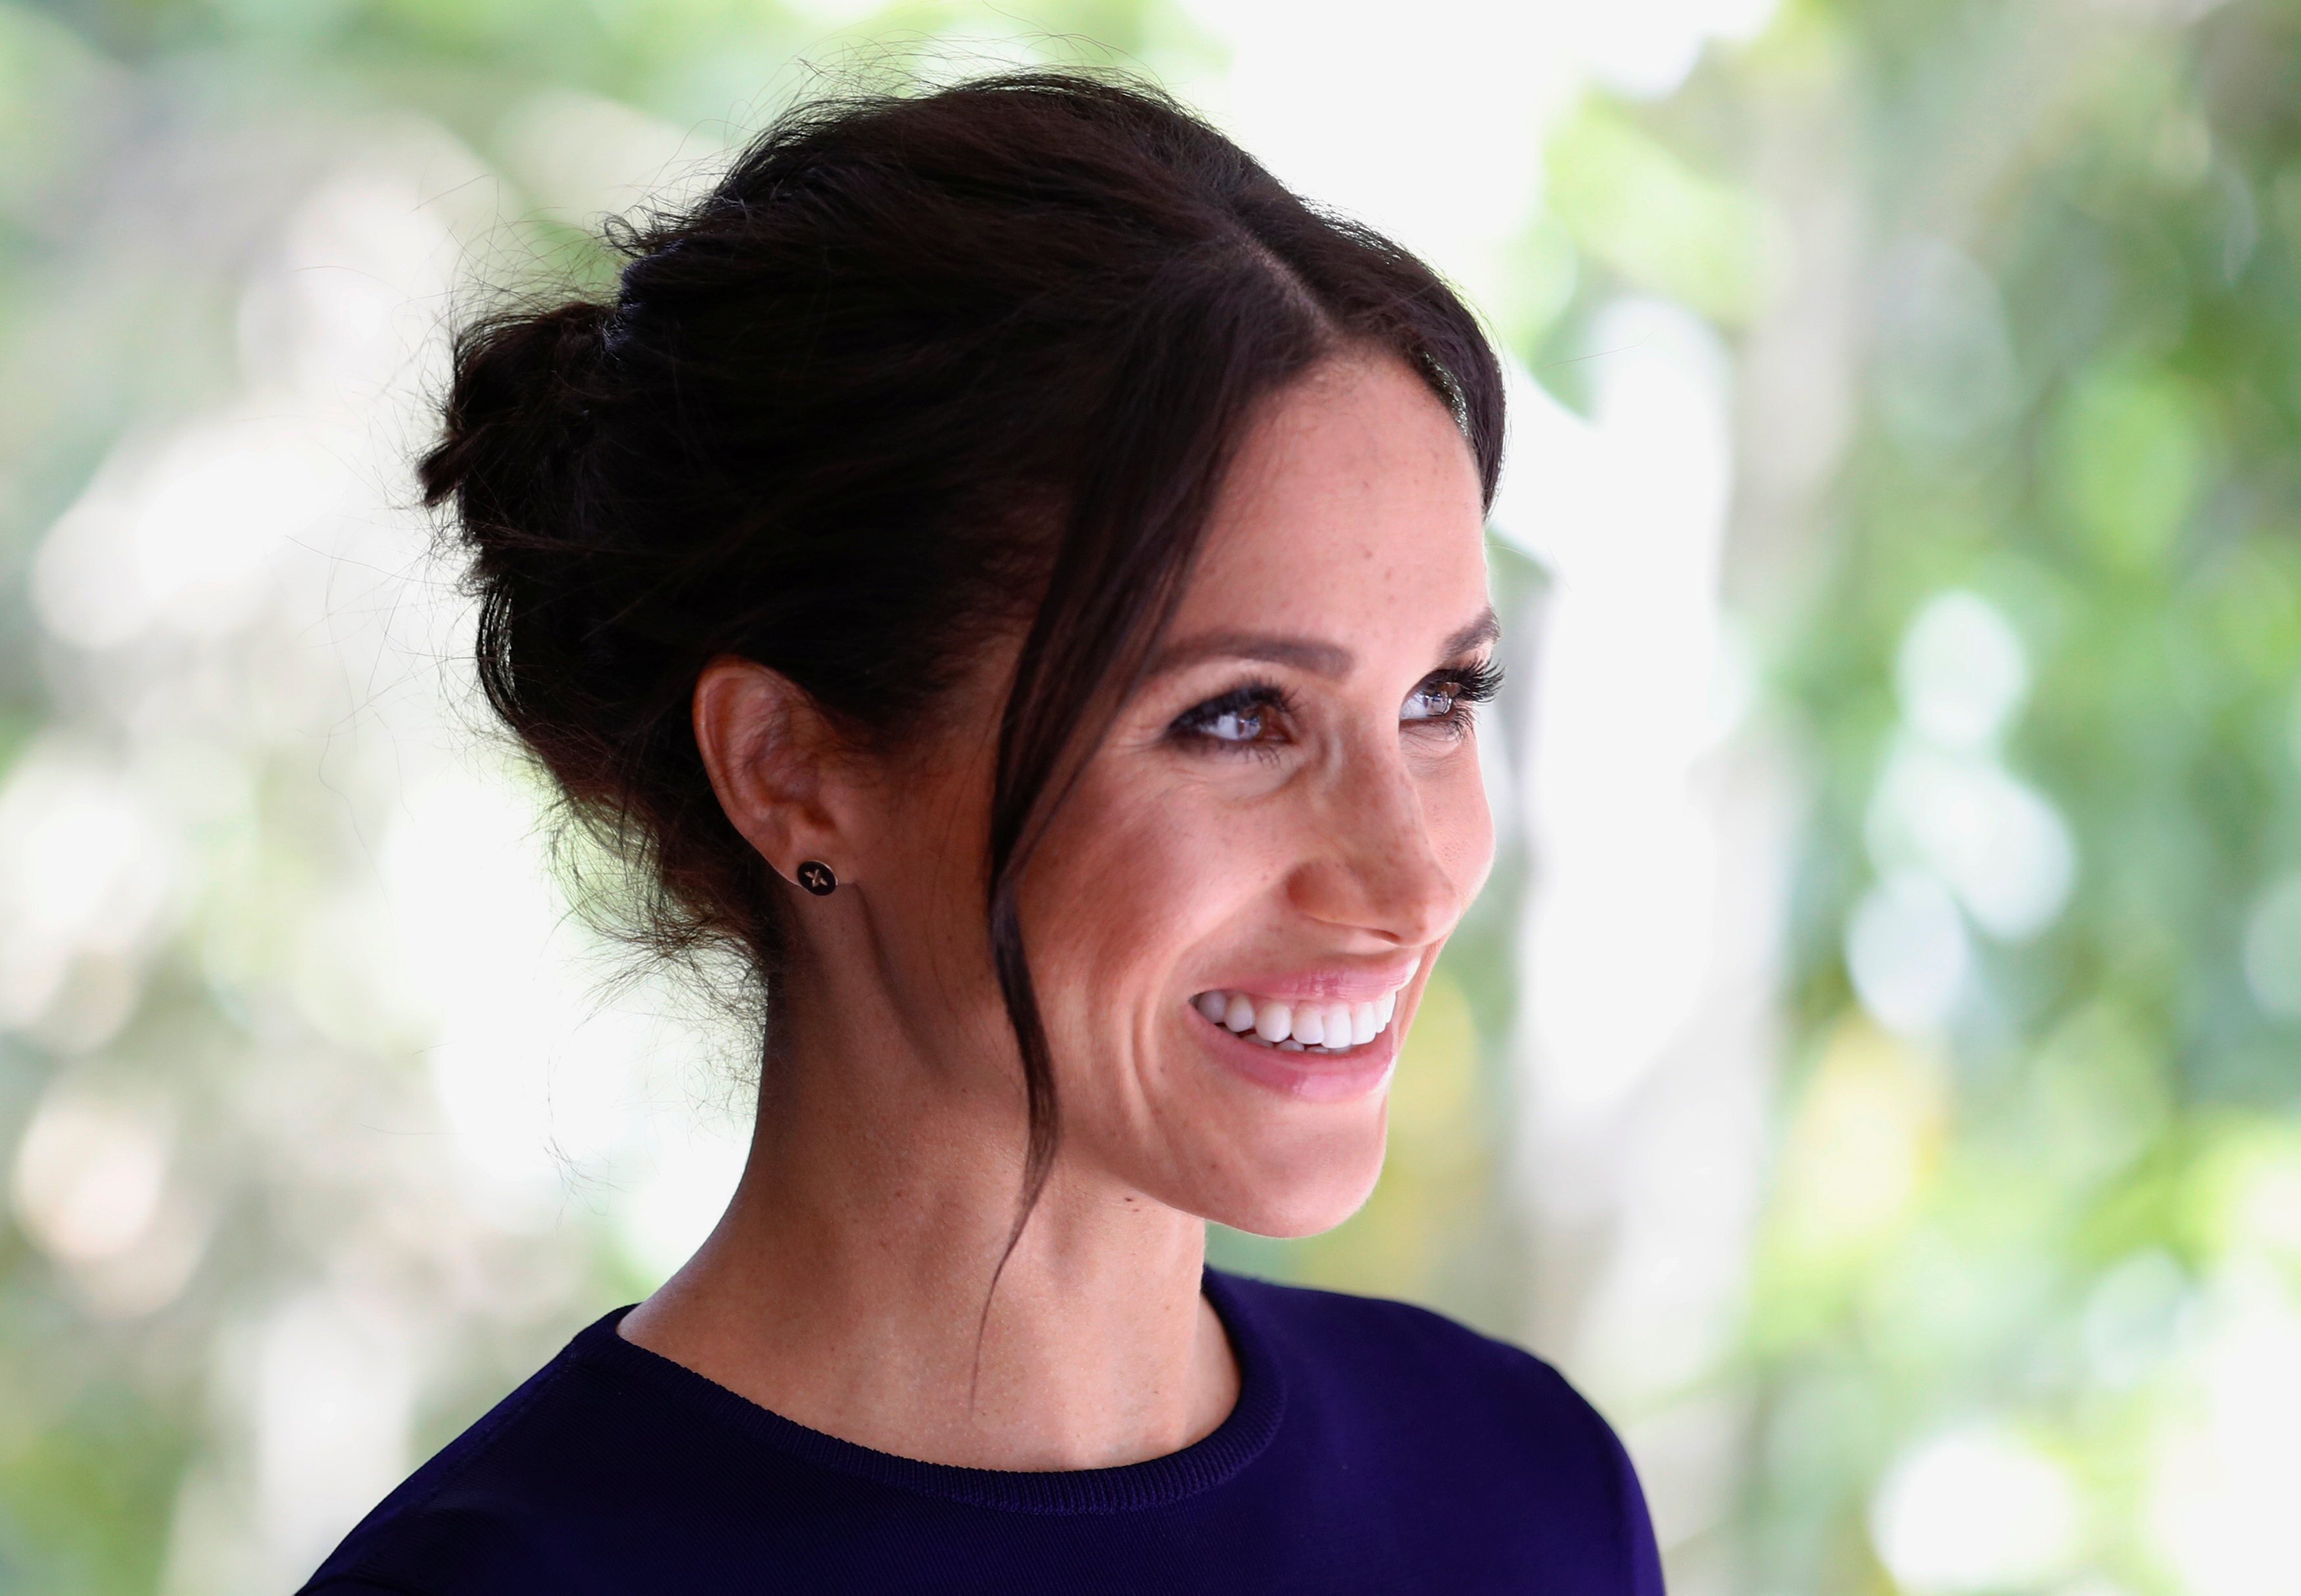 Duchess Meghan | Photo: Getty Images